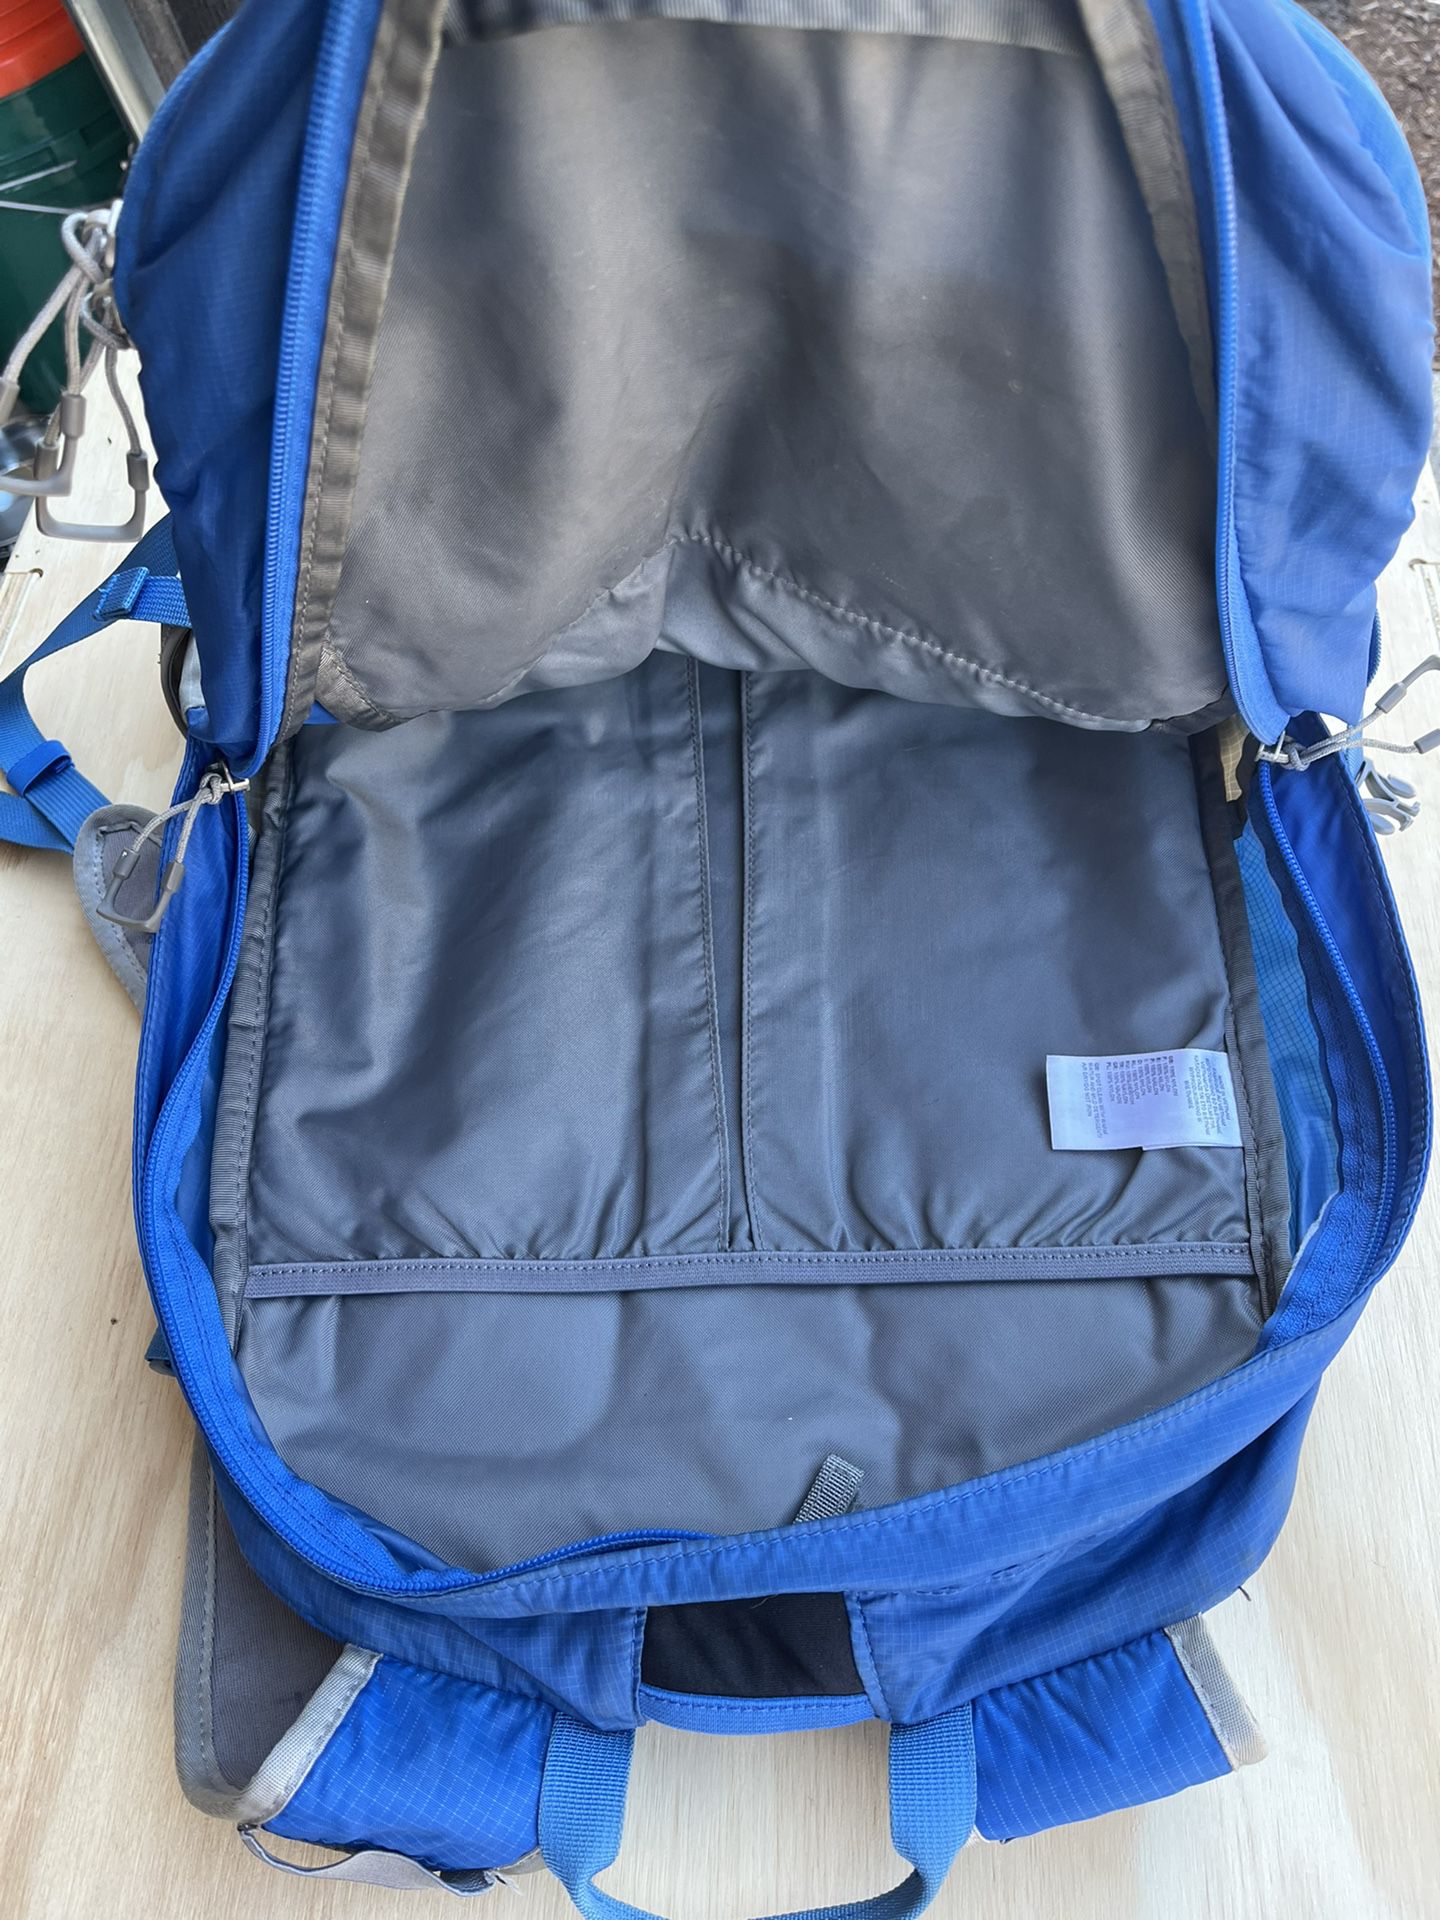 North Face Amgstrom 28 Hiking Pack